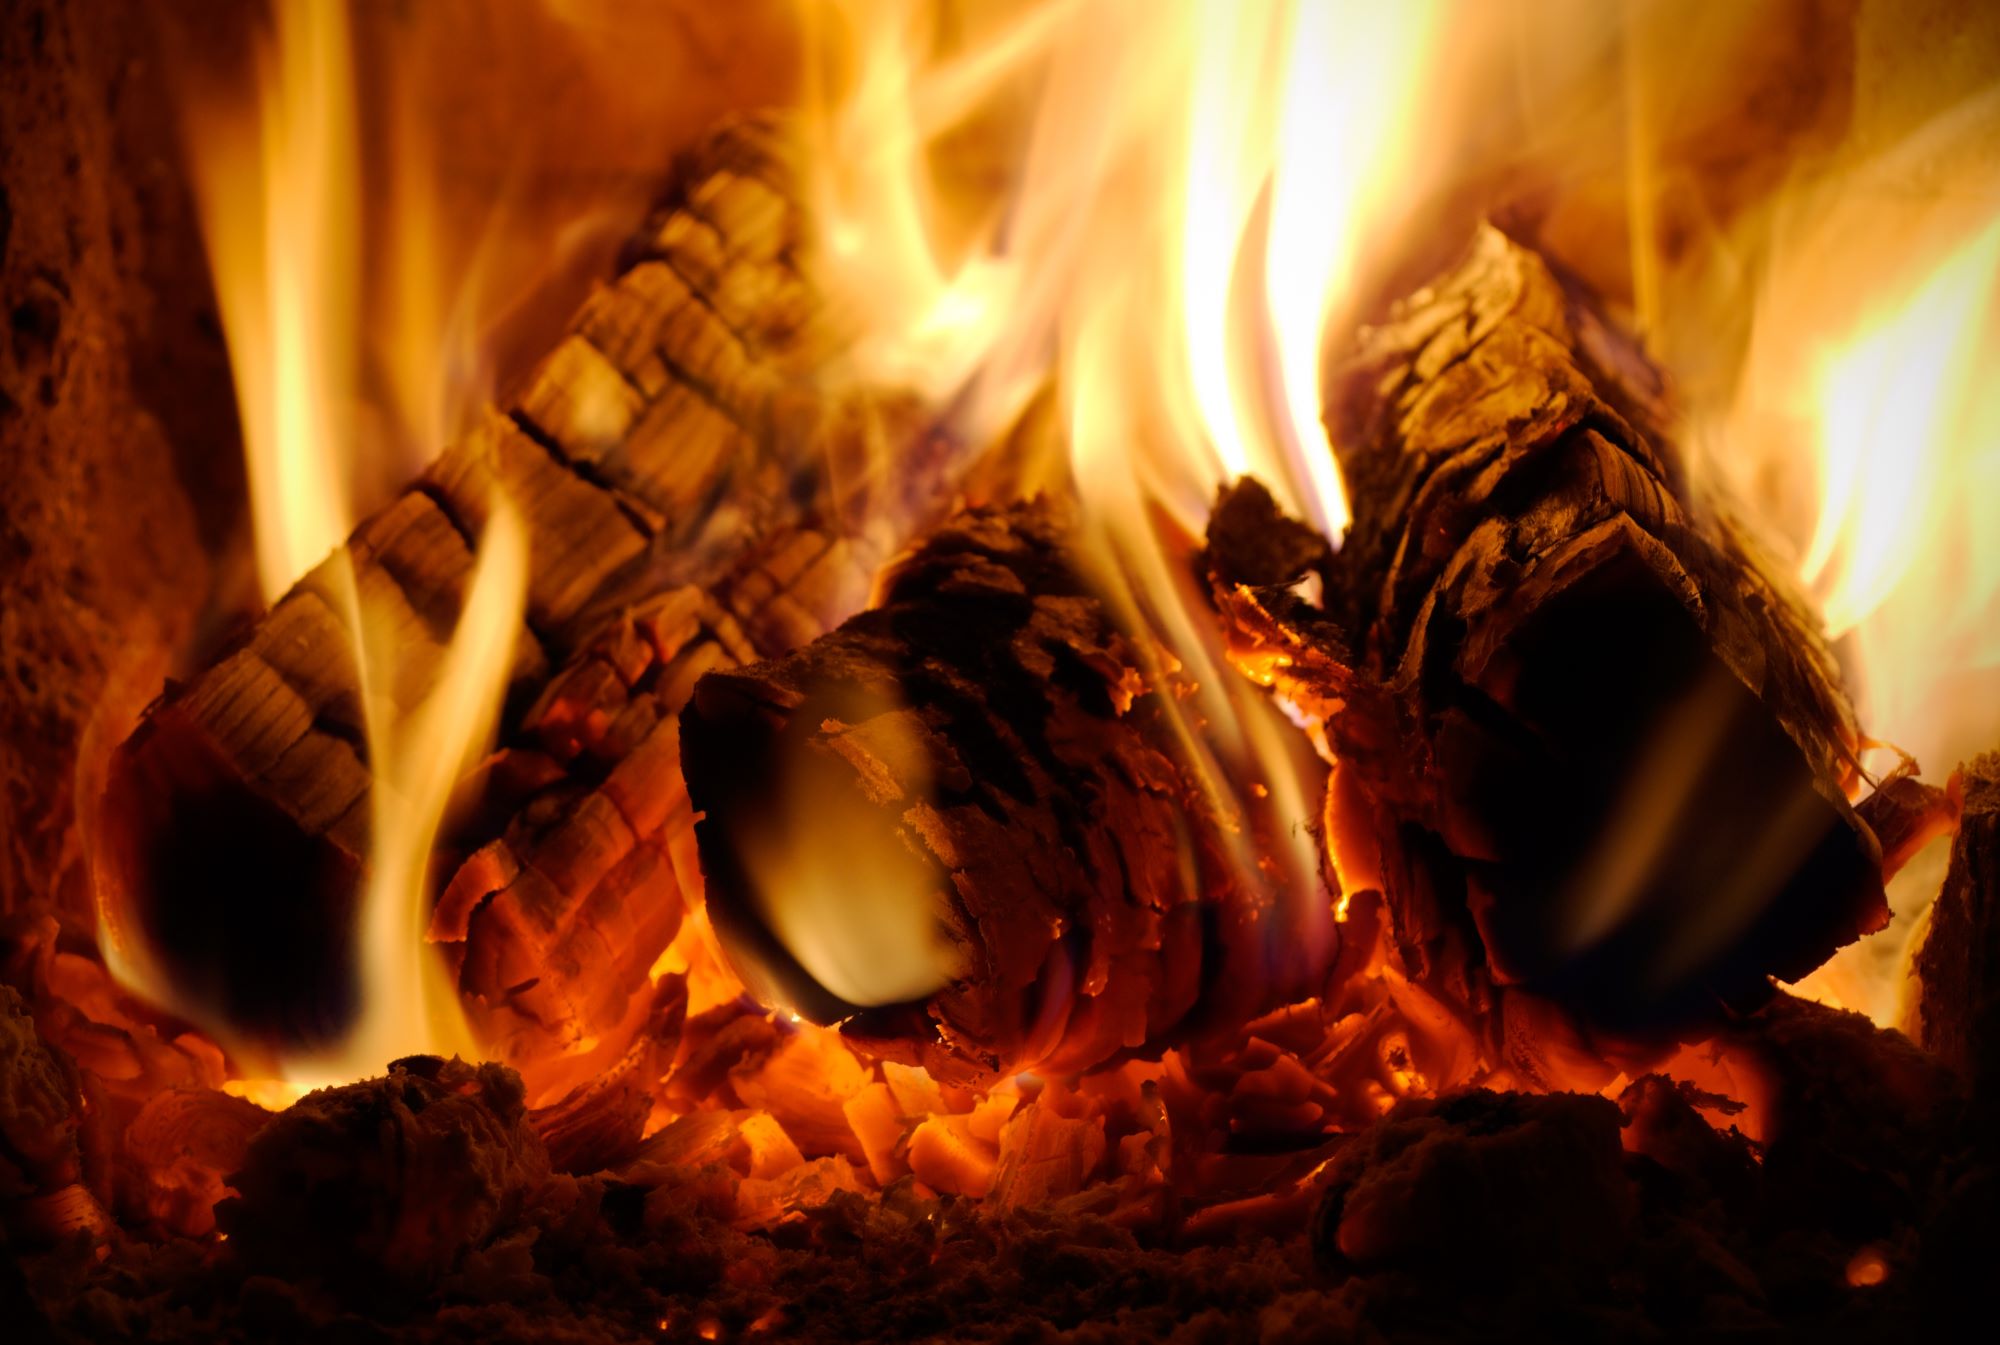 Burning dry wood is much less harmful to the environment. Image: Sinelev/Shutterstock